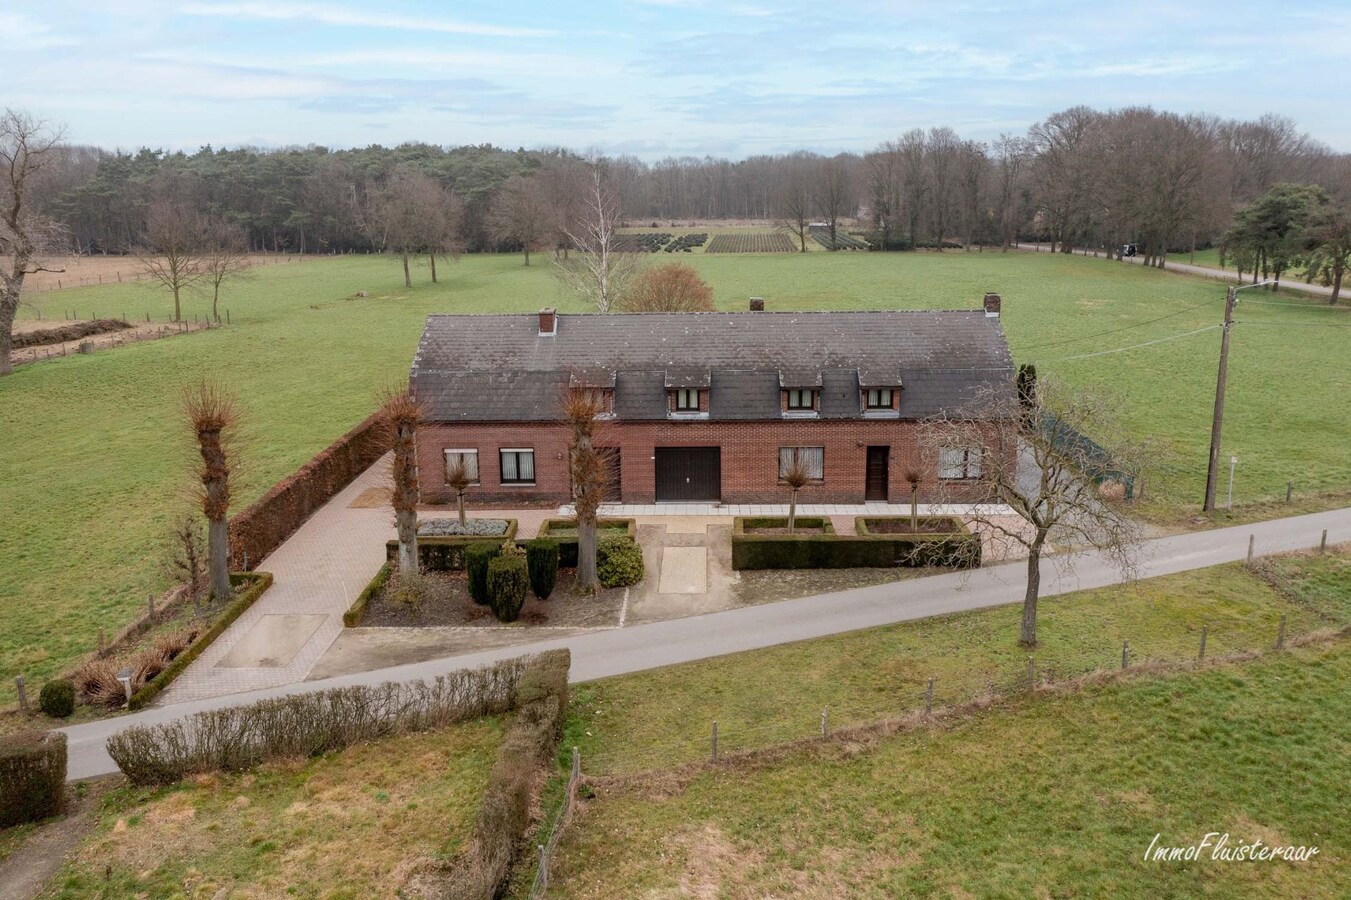 Property for sale in Grote Brogel